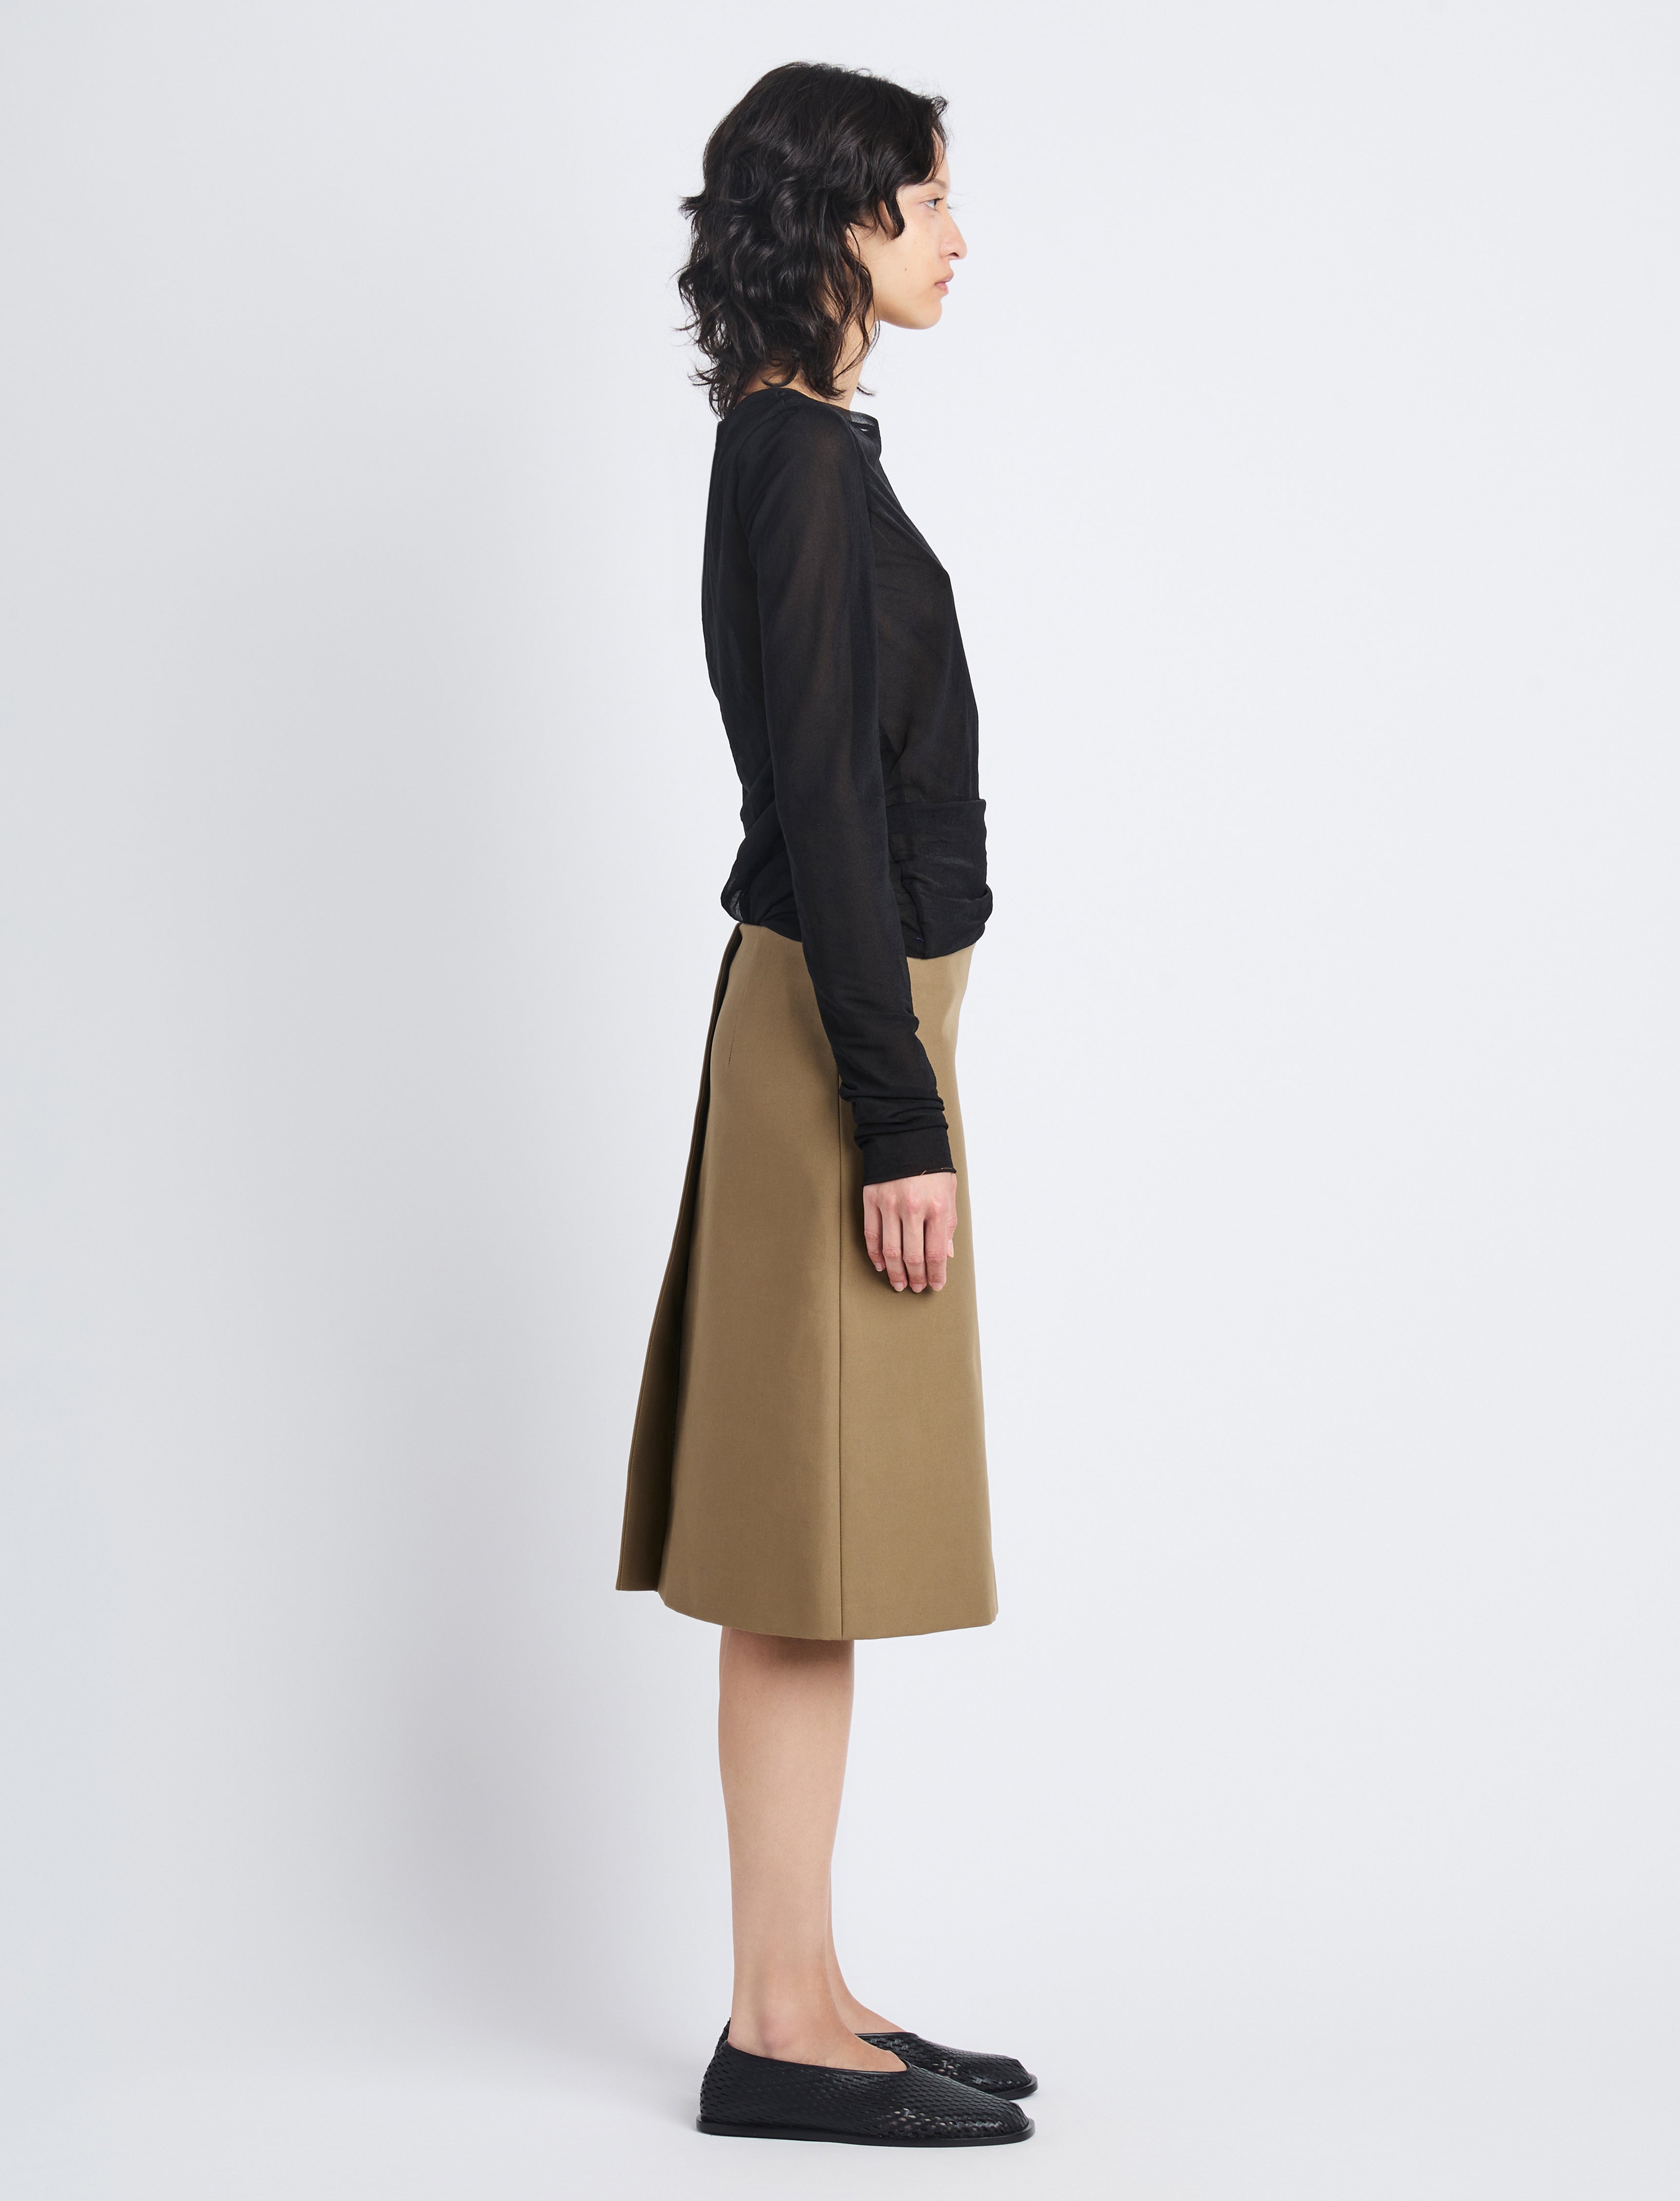 Adele Skirt in Eco Cotton Twill - 3